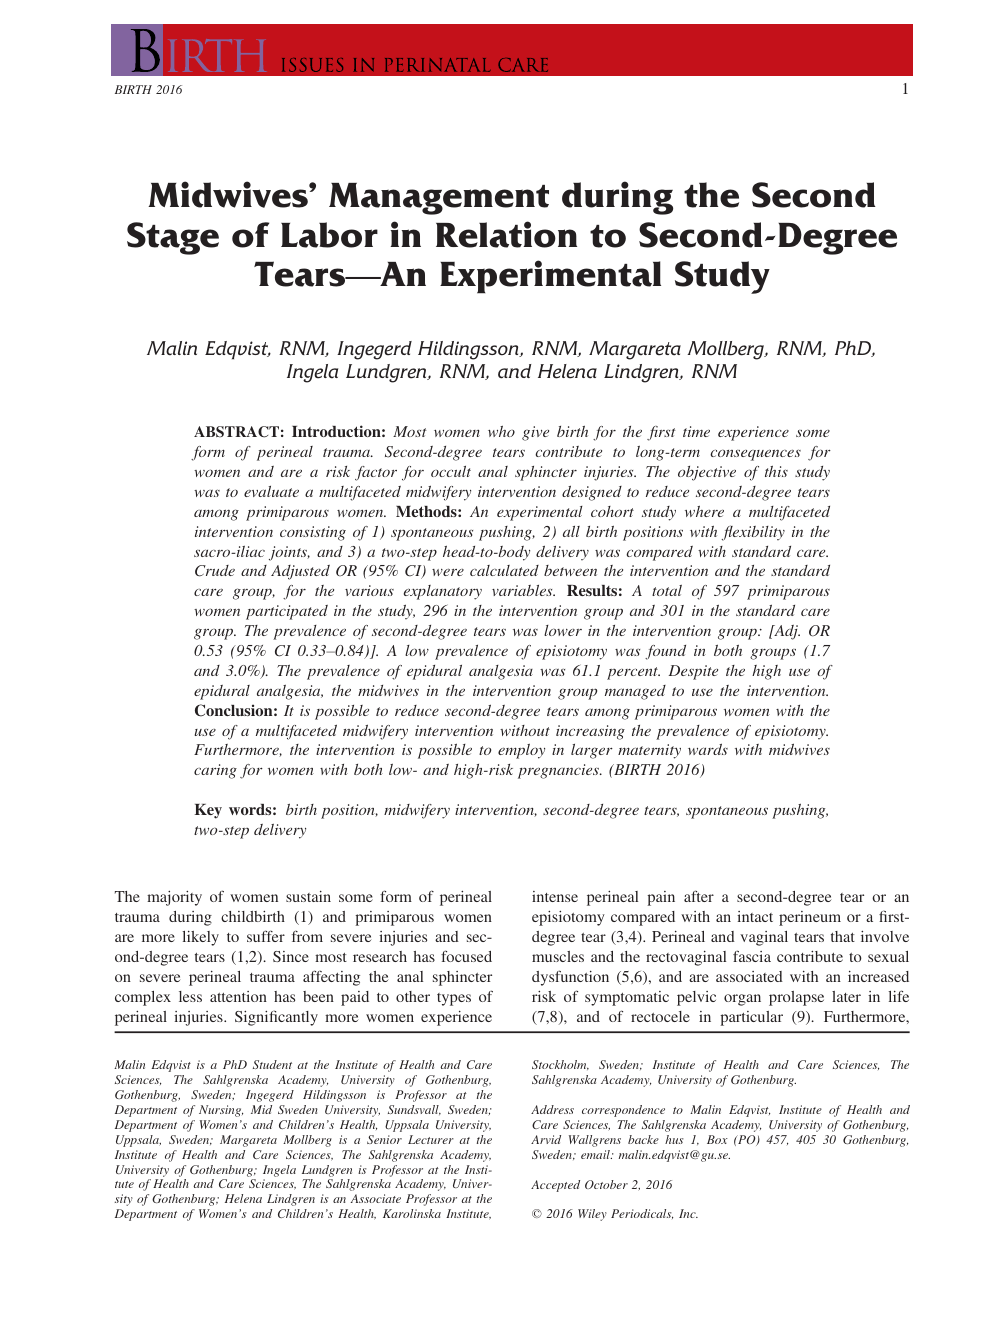 Midwives Management during the Second Stage of Labor in Relation to Second-Degree Tears-An Experimental Study image